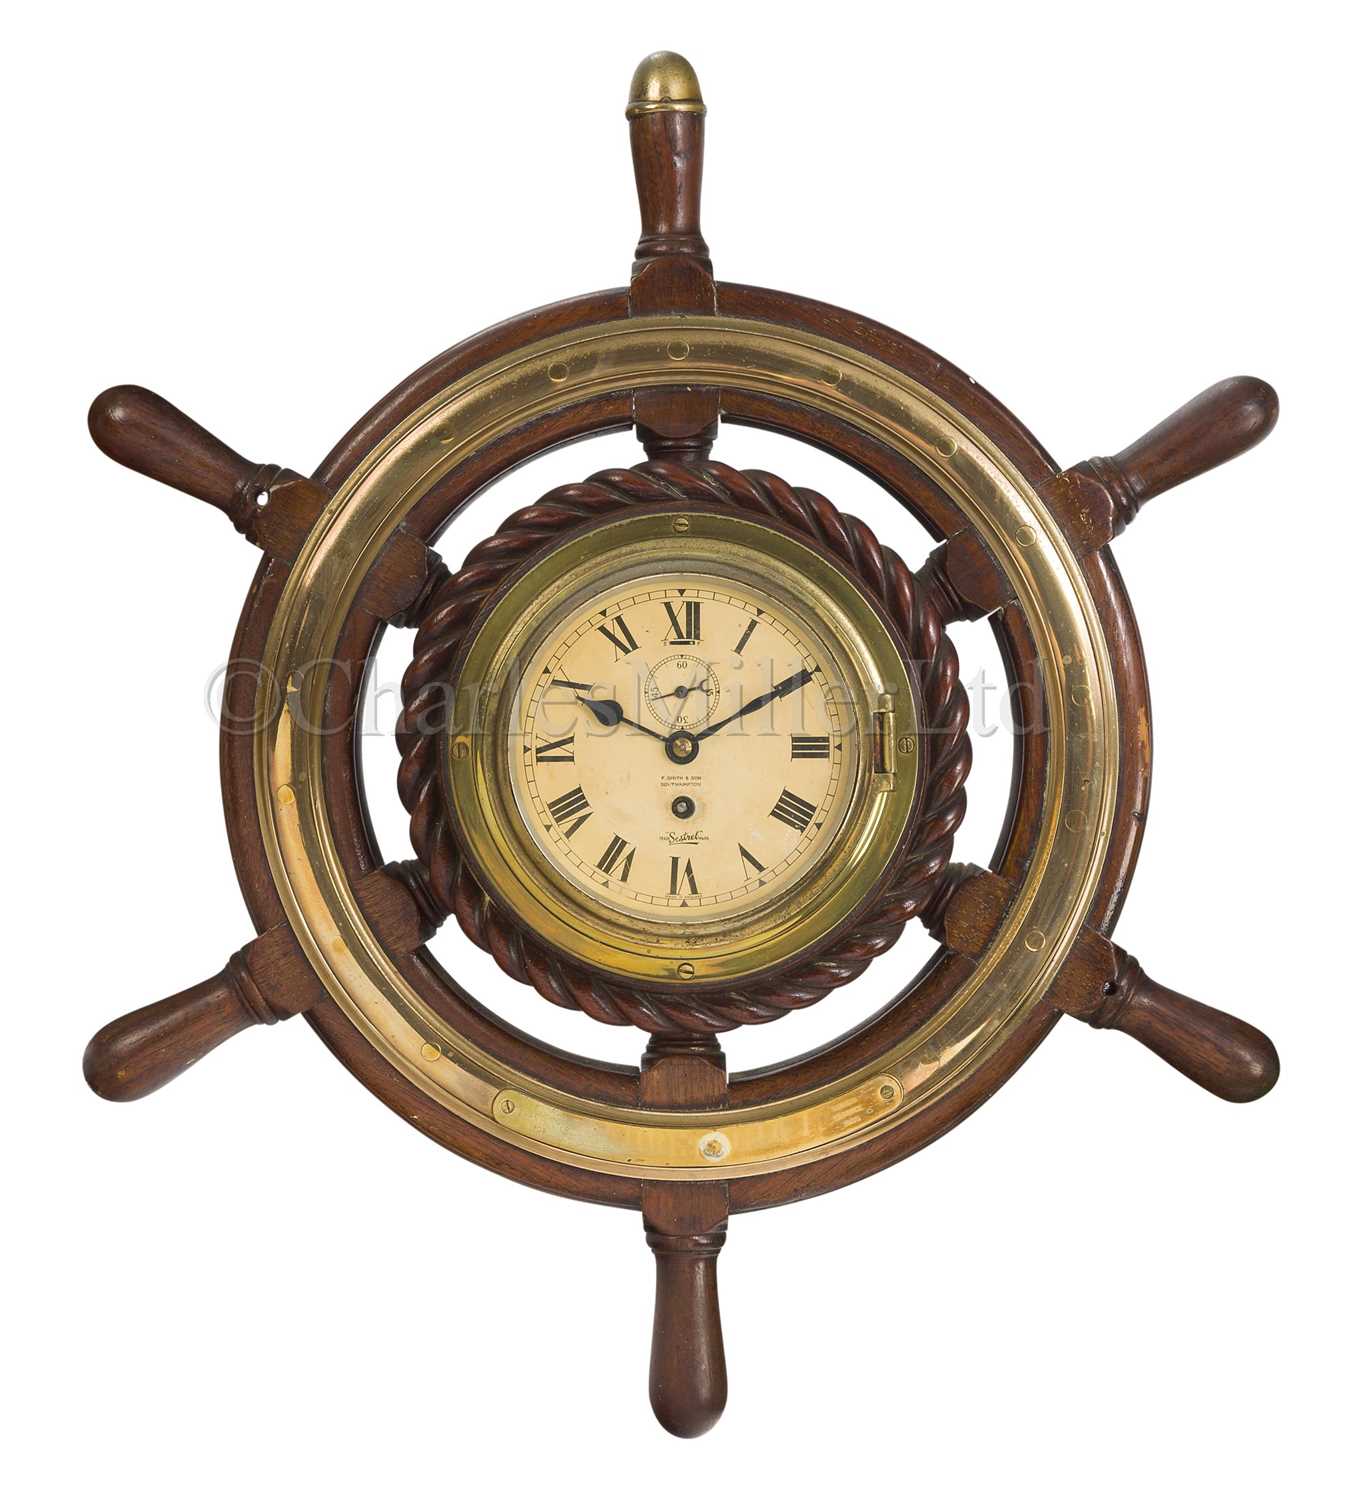 Lot 187 - A BULKHEAD SHP'S CLOCK, BELIEVED TO BE FROM R.M.S. MAURETANIA (1906) AND PRESENTED 1950